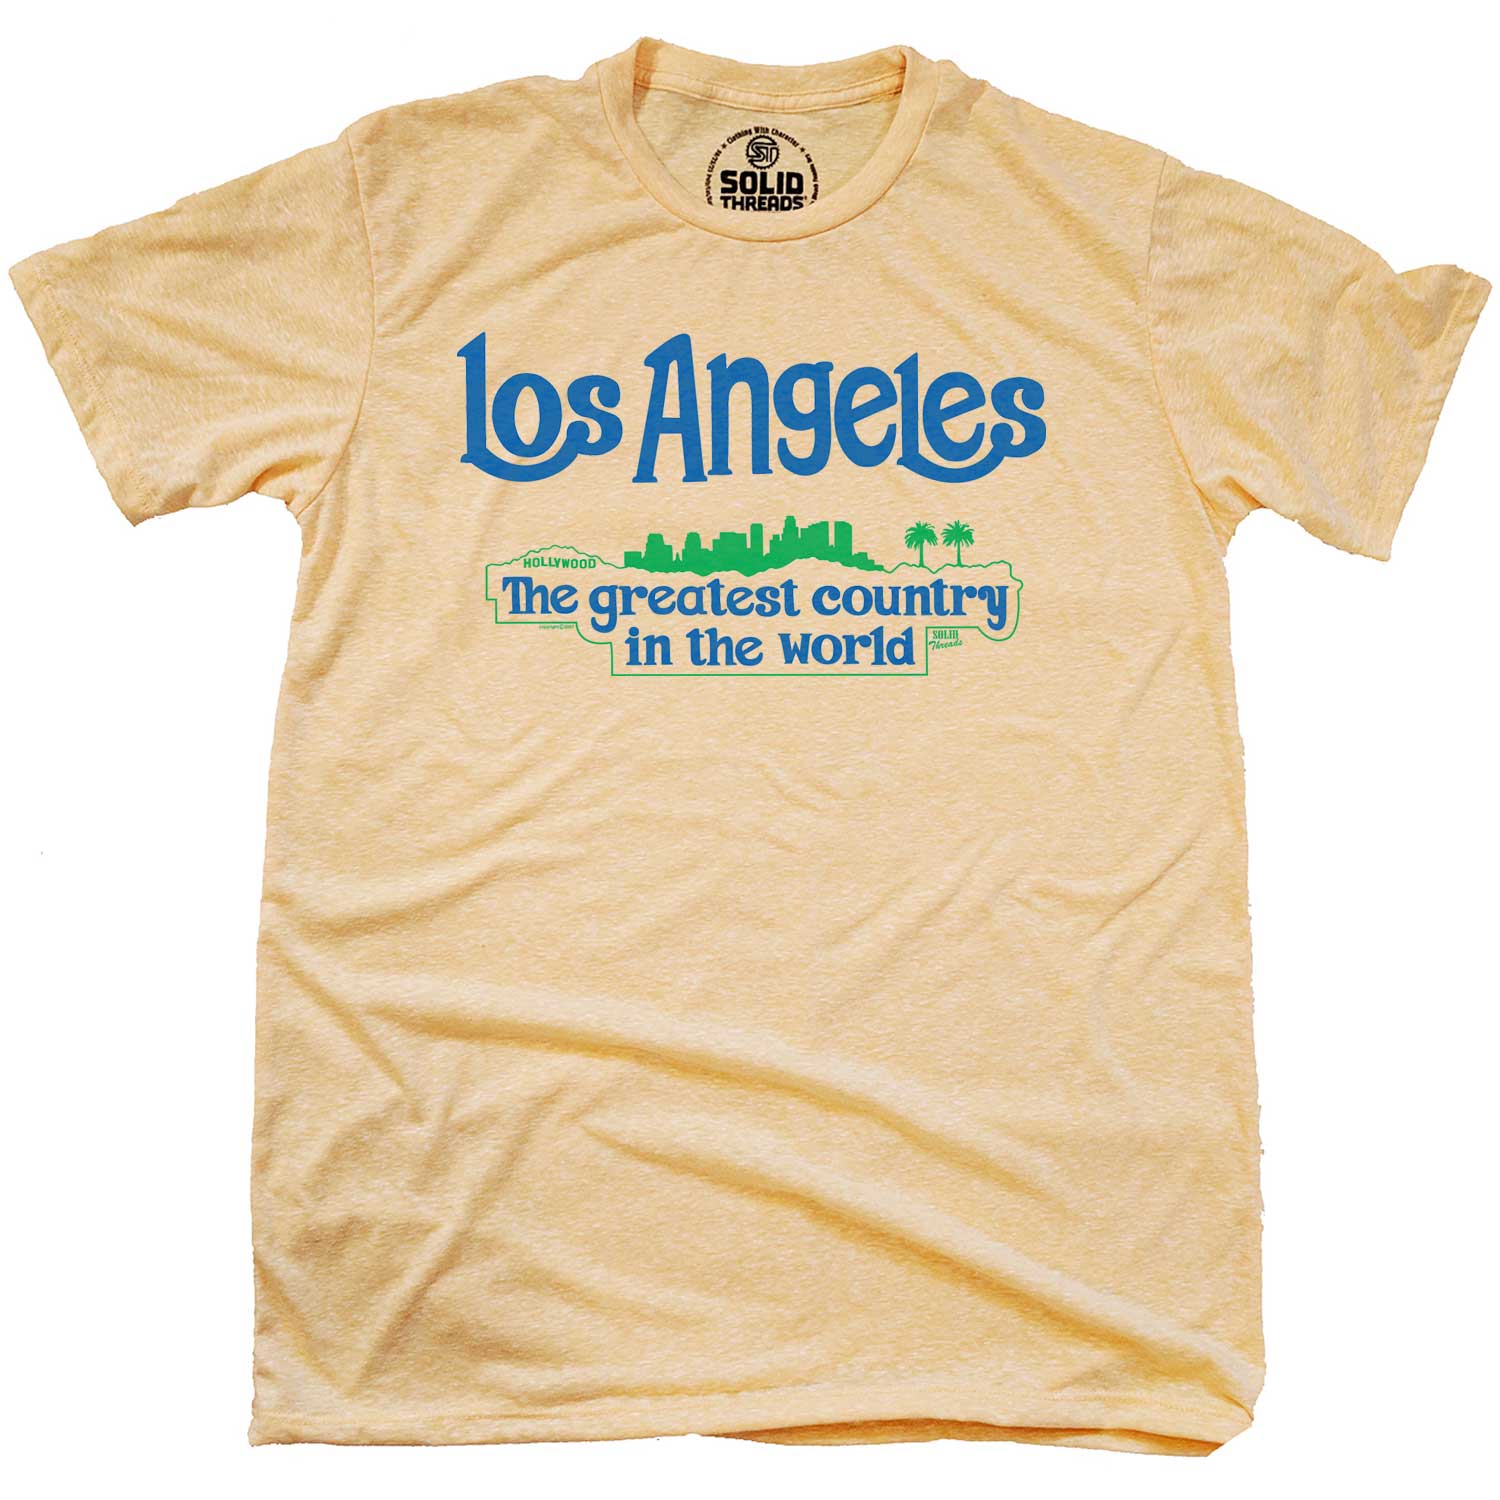 Los Angeles Greatest Country Retro T-Shirt| Funny California Graphic Tee | Solid Threads Triblend Gold / Medium